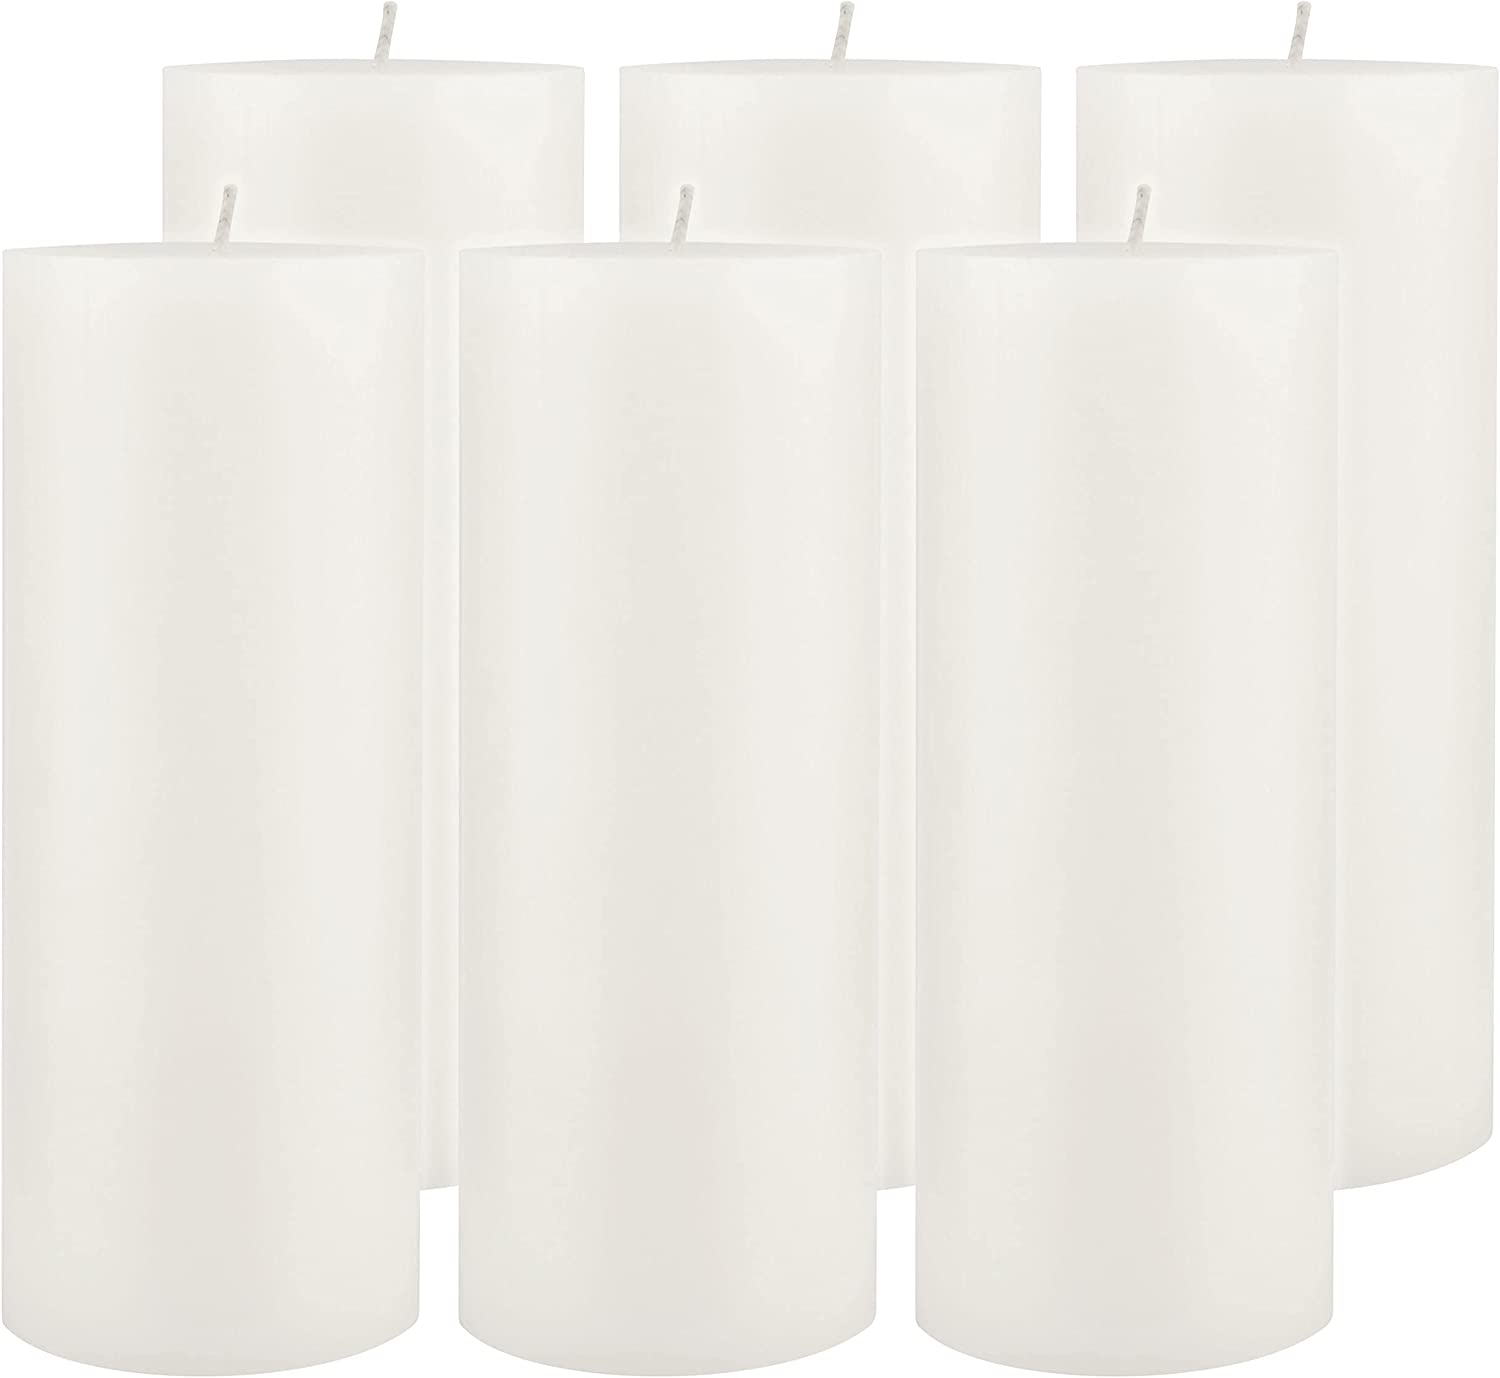 Stonebriar Tall 3 x 8 Inch 110 Hour Long Burning Unscented Wax Flat Top Pillar Candles, White, 6 Pack